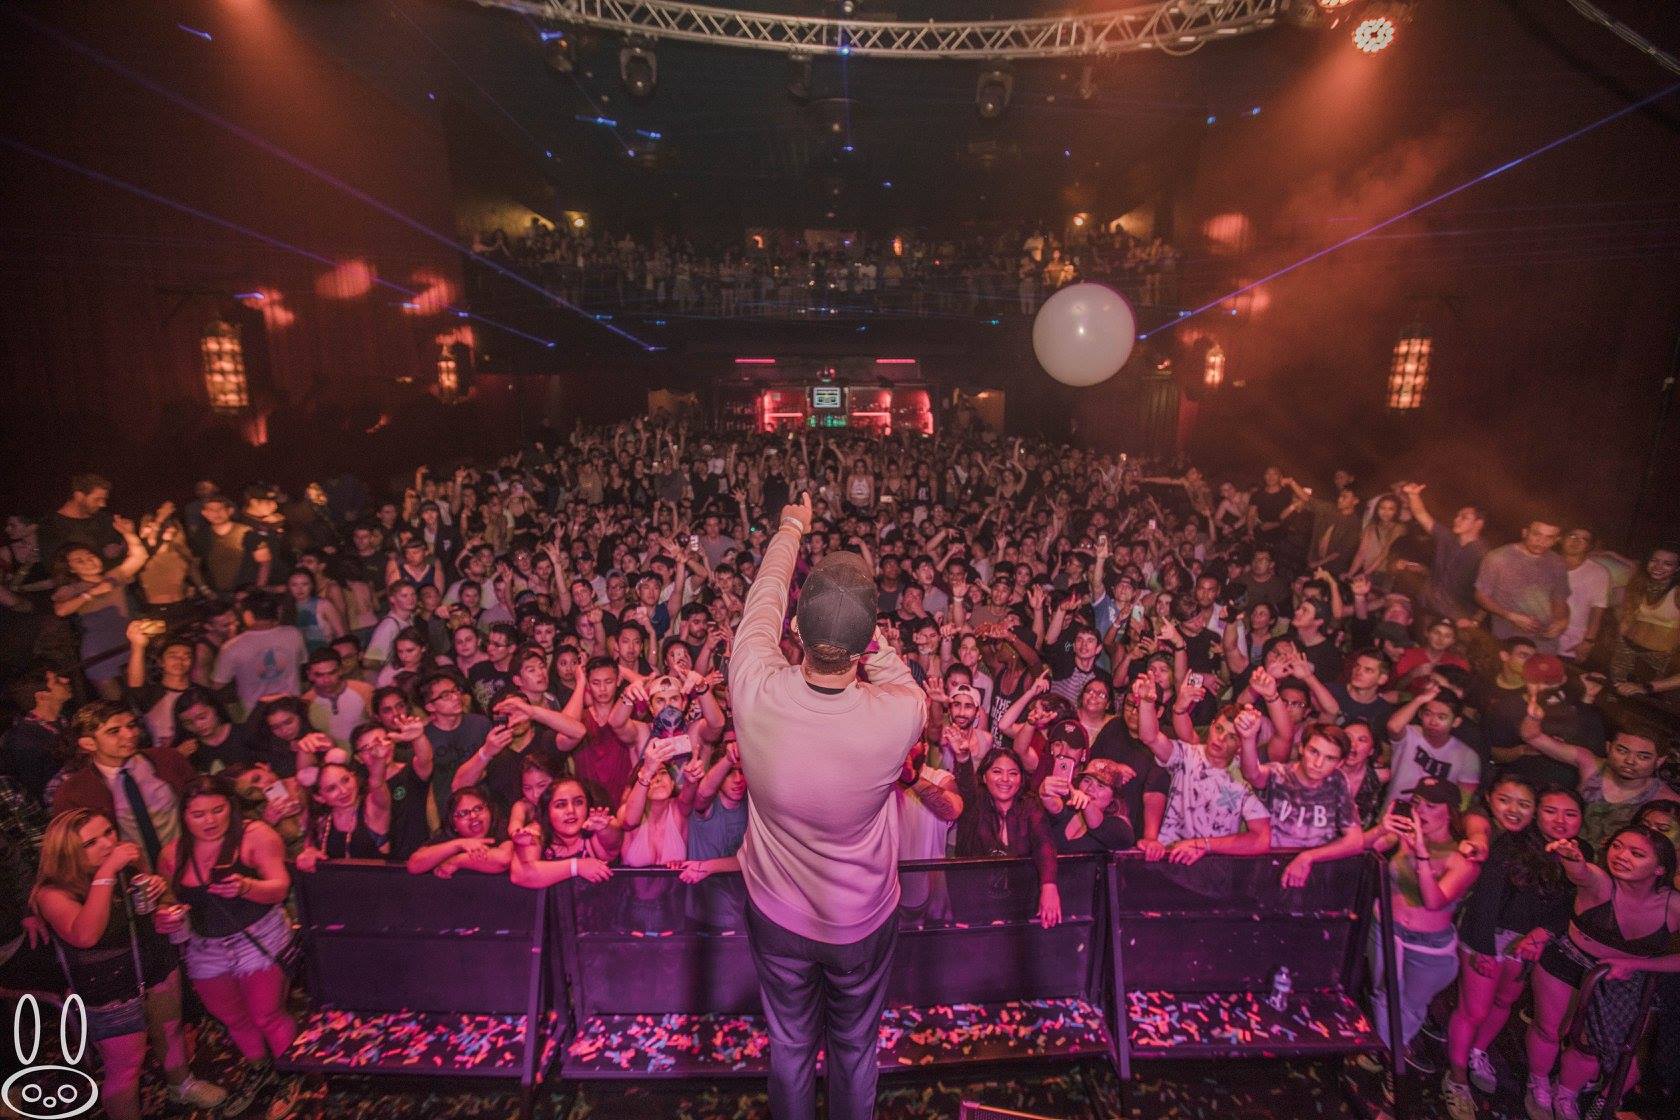 San Holo reaching out to the crowd